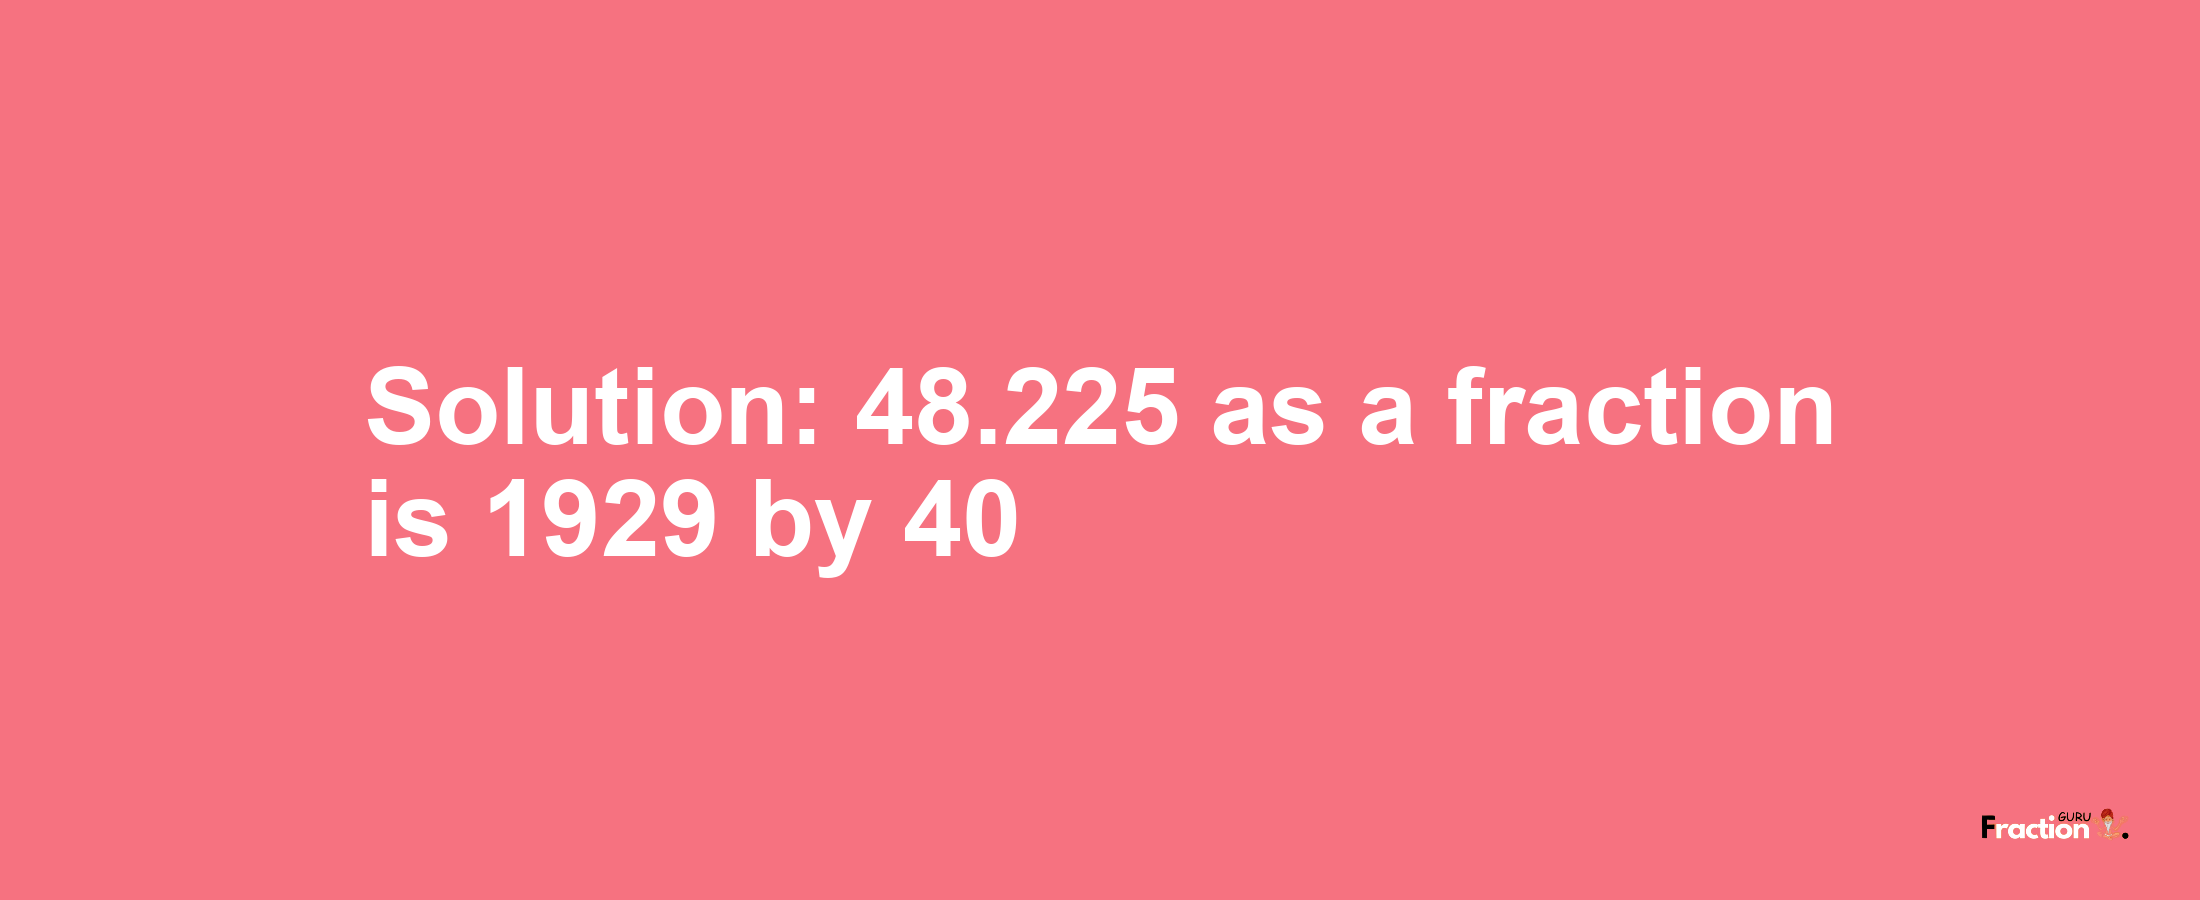 Solution:48.225 as a fraction is 1929/40